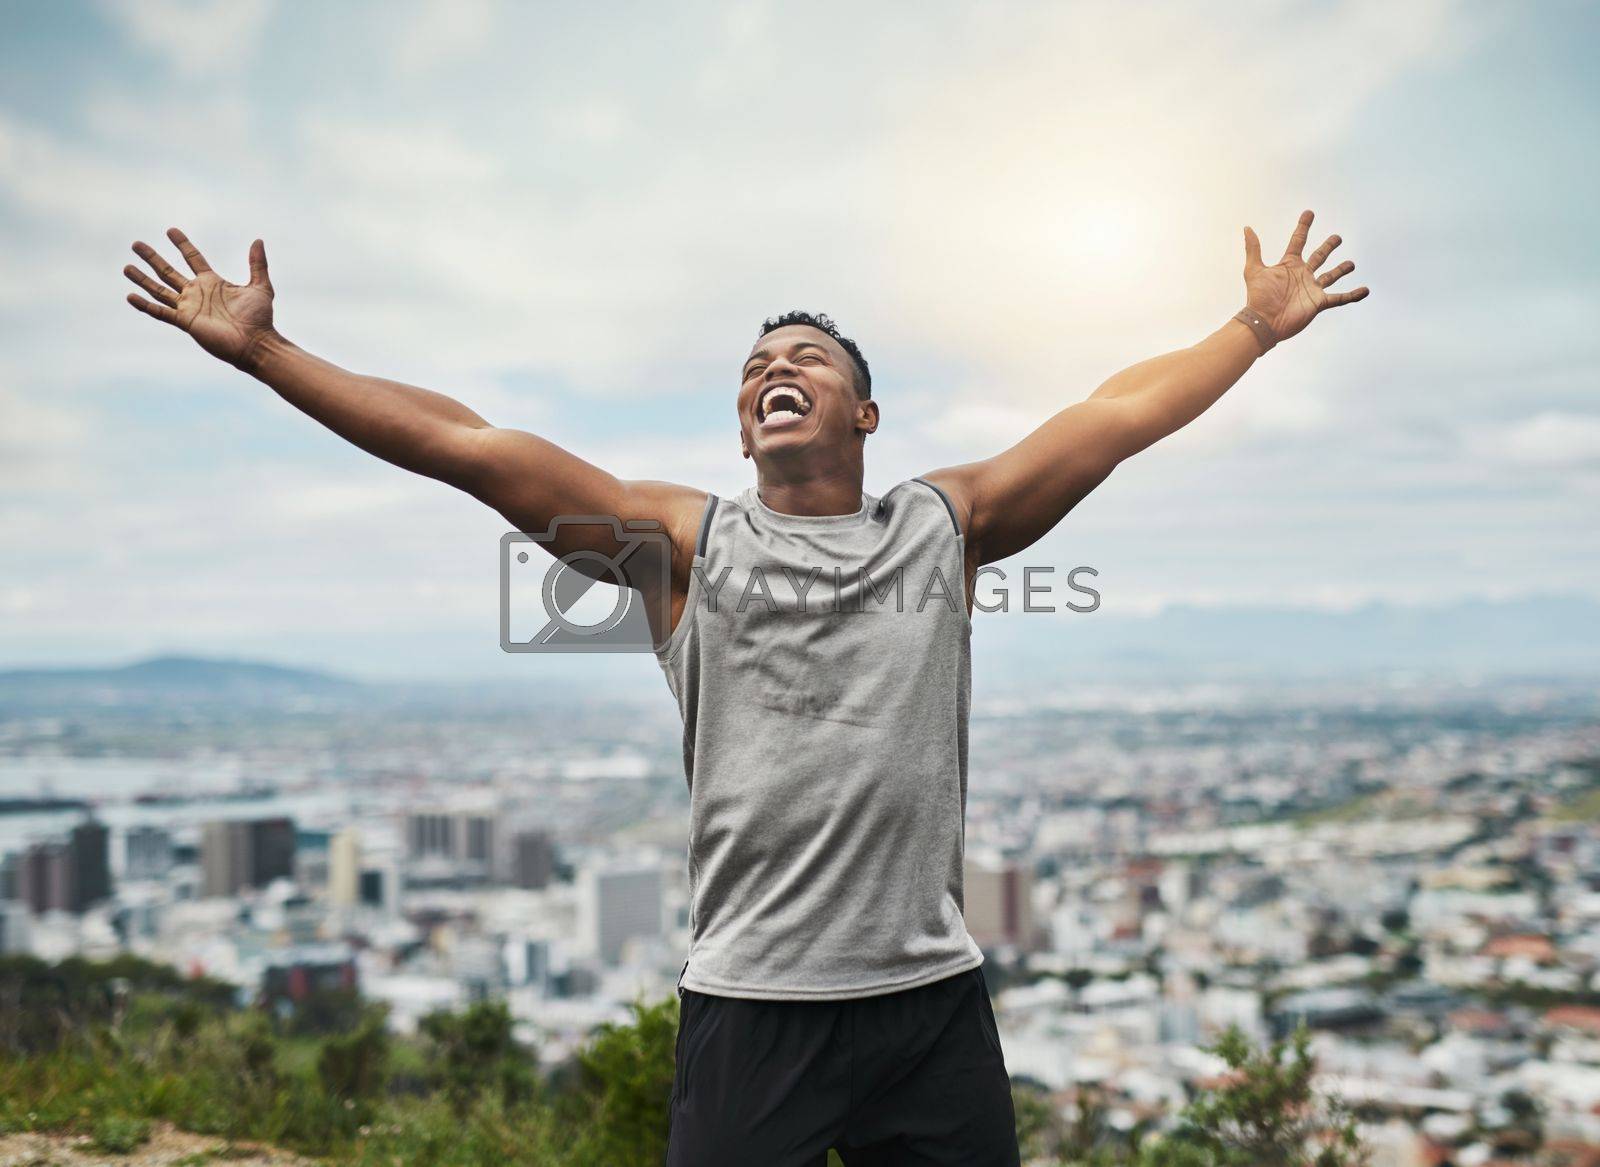 Royalty free image of Im the king of the world. a handsome young sportsman cheering in celebration outside. by YuriArcurs